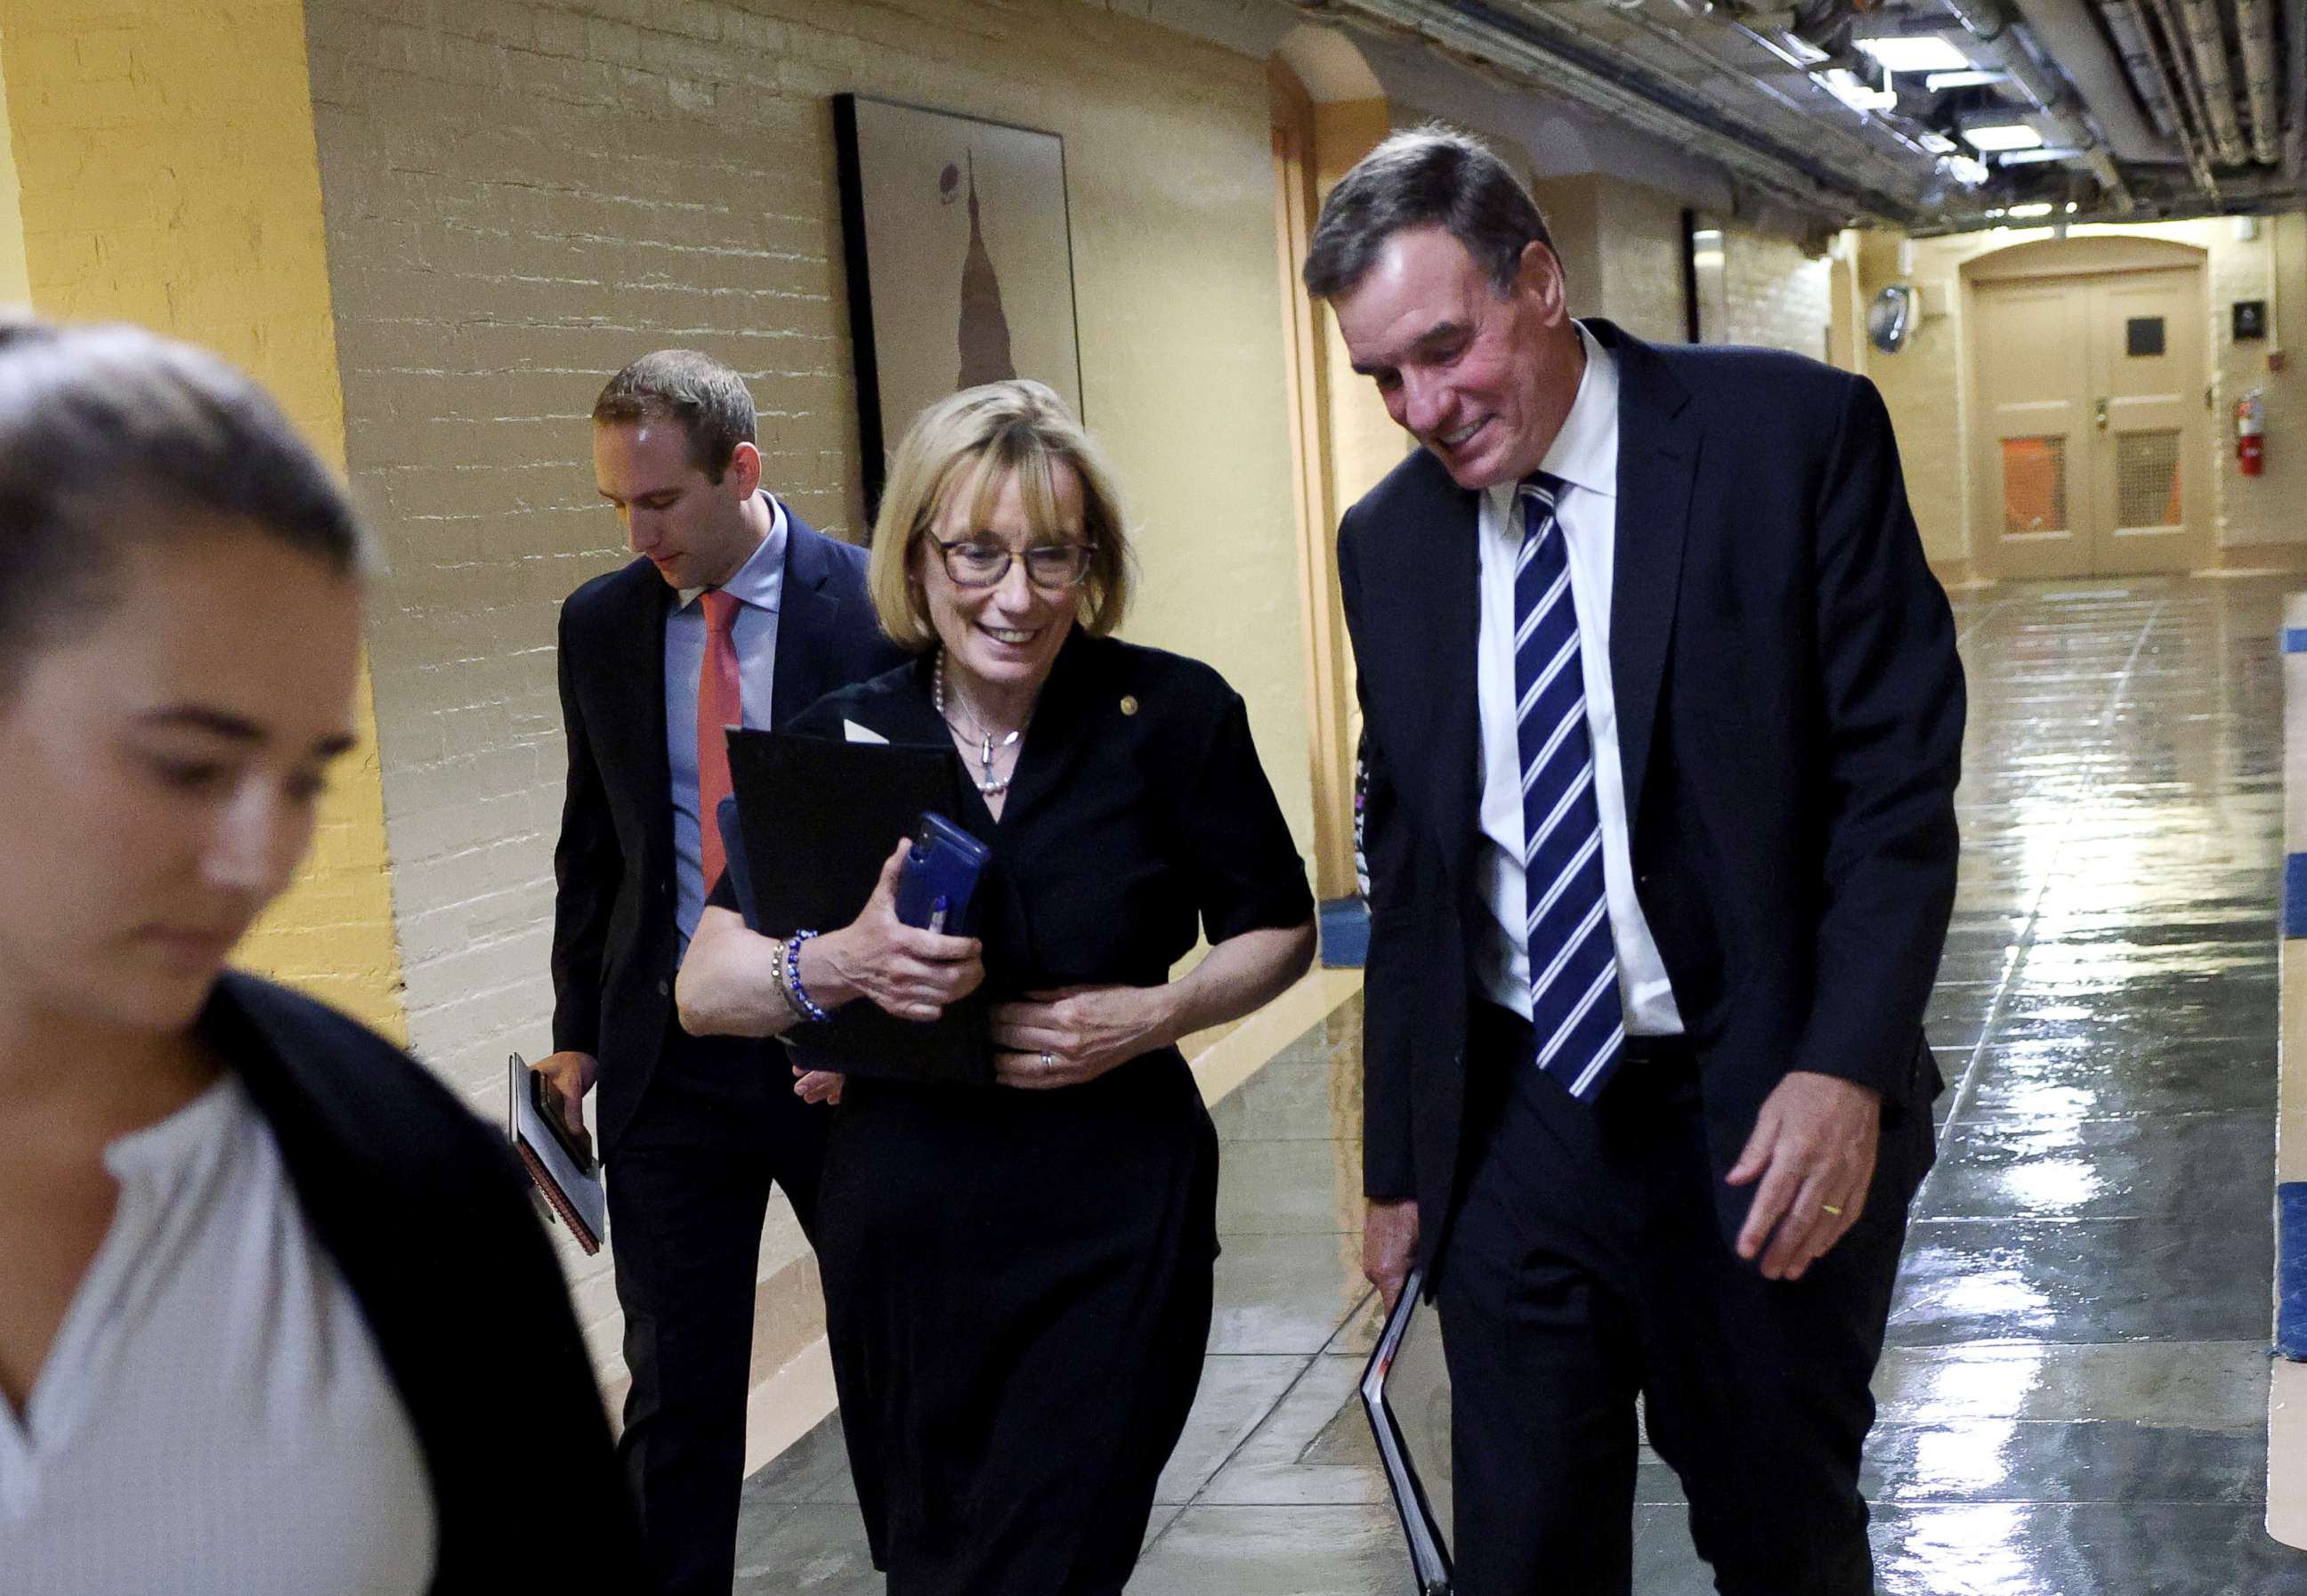 PHOTO: Sen. Mark Warner and Sen. Maggie Hassan leave a bipartisan meeting on infrastructure at the U.S. Capitol on July 13, 2021, in Washington, D.C.